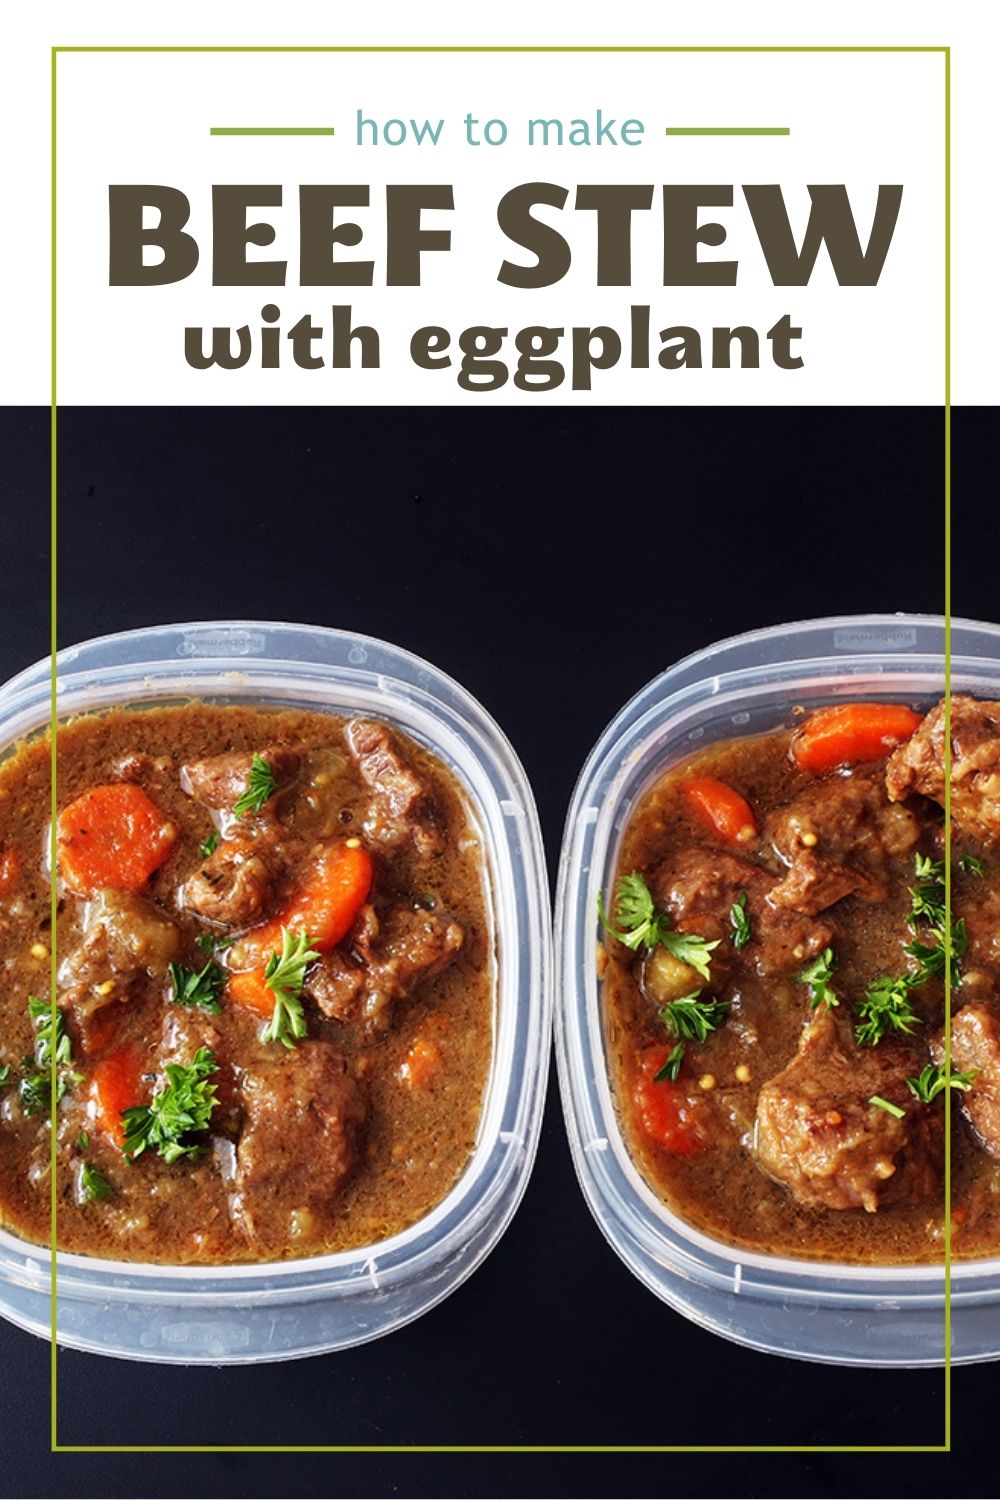 meal prep containers with beef stew